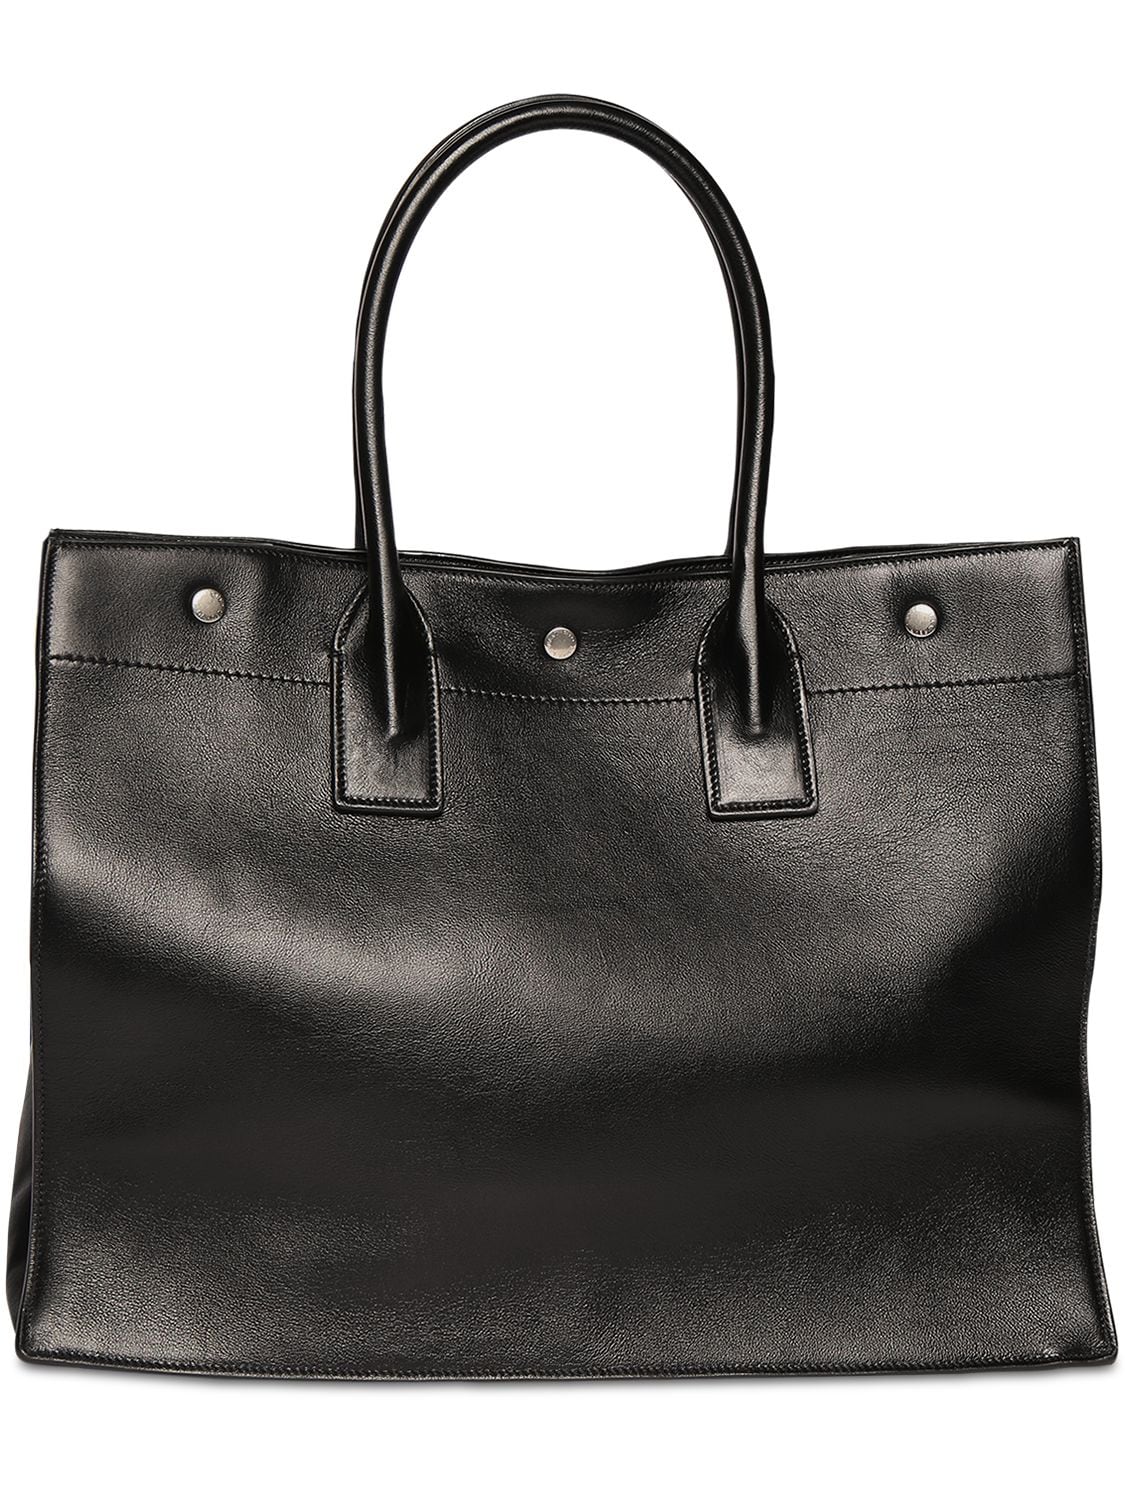 Saint Laurent Rive Gauche Small Leather Tote Bag In Black